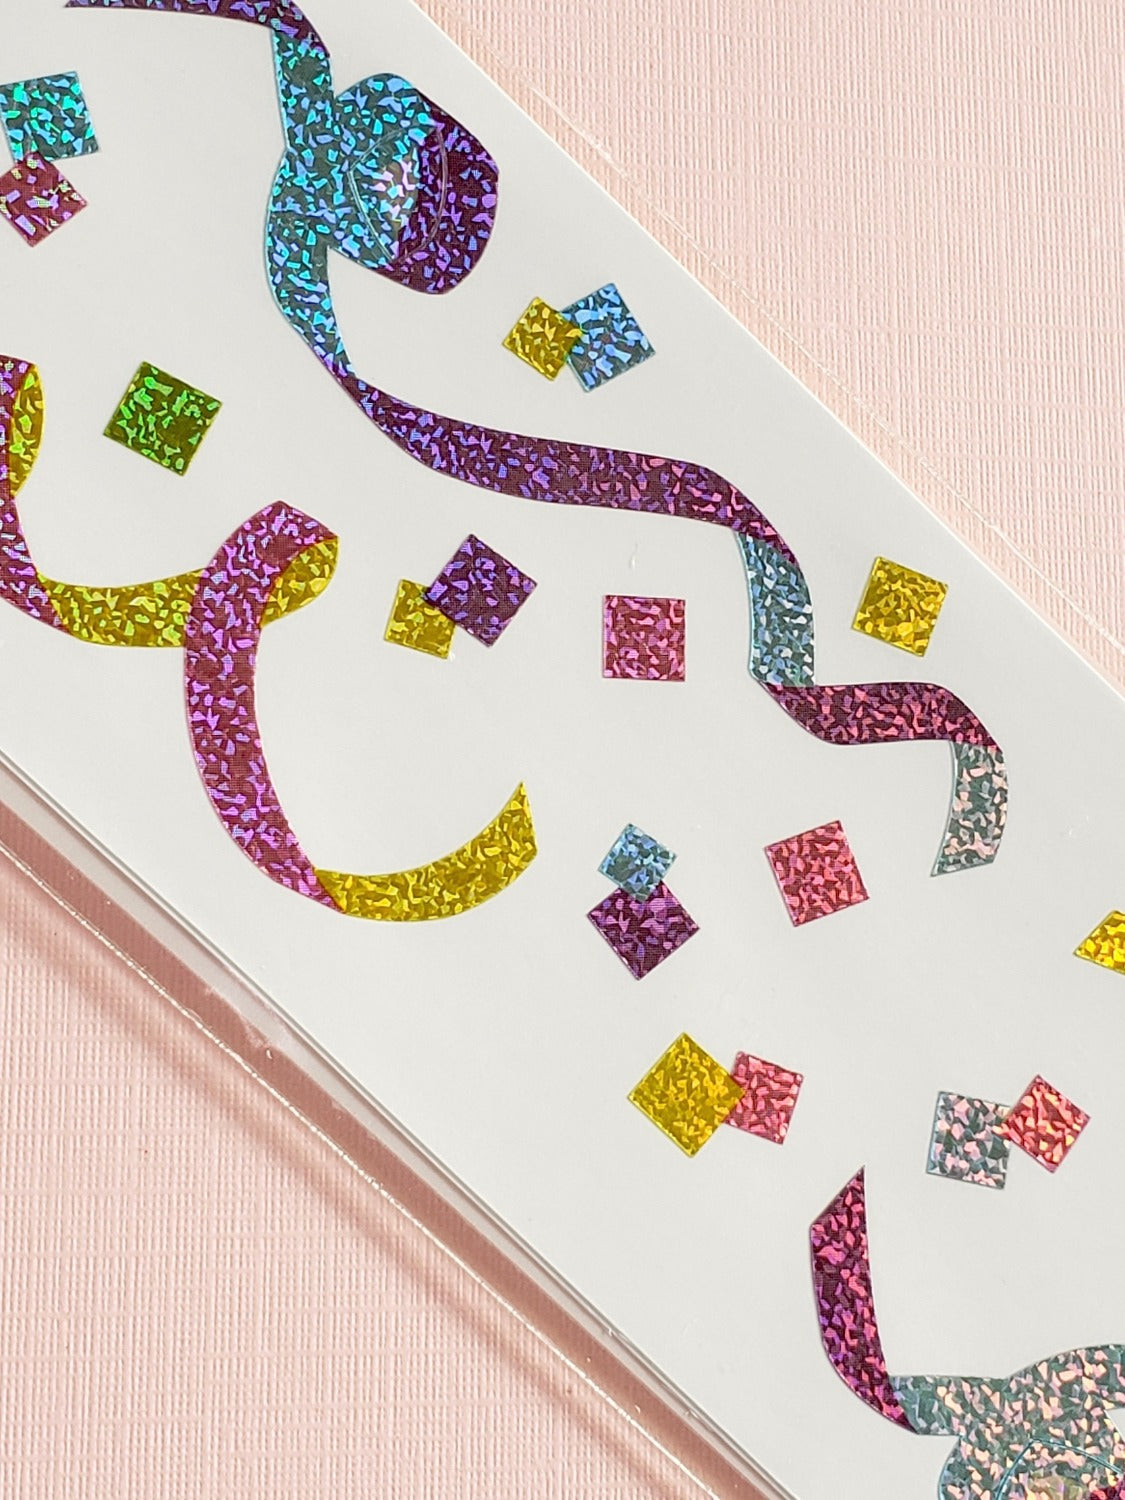 Mrs Grossman's limited edition pastel confetting stickers